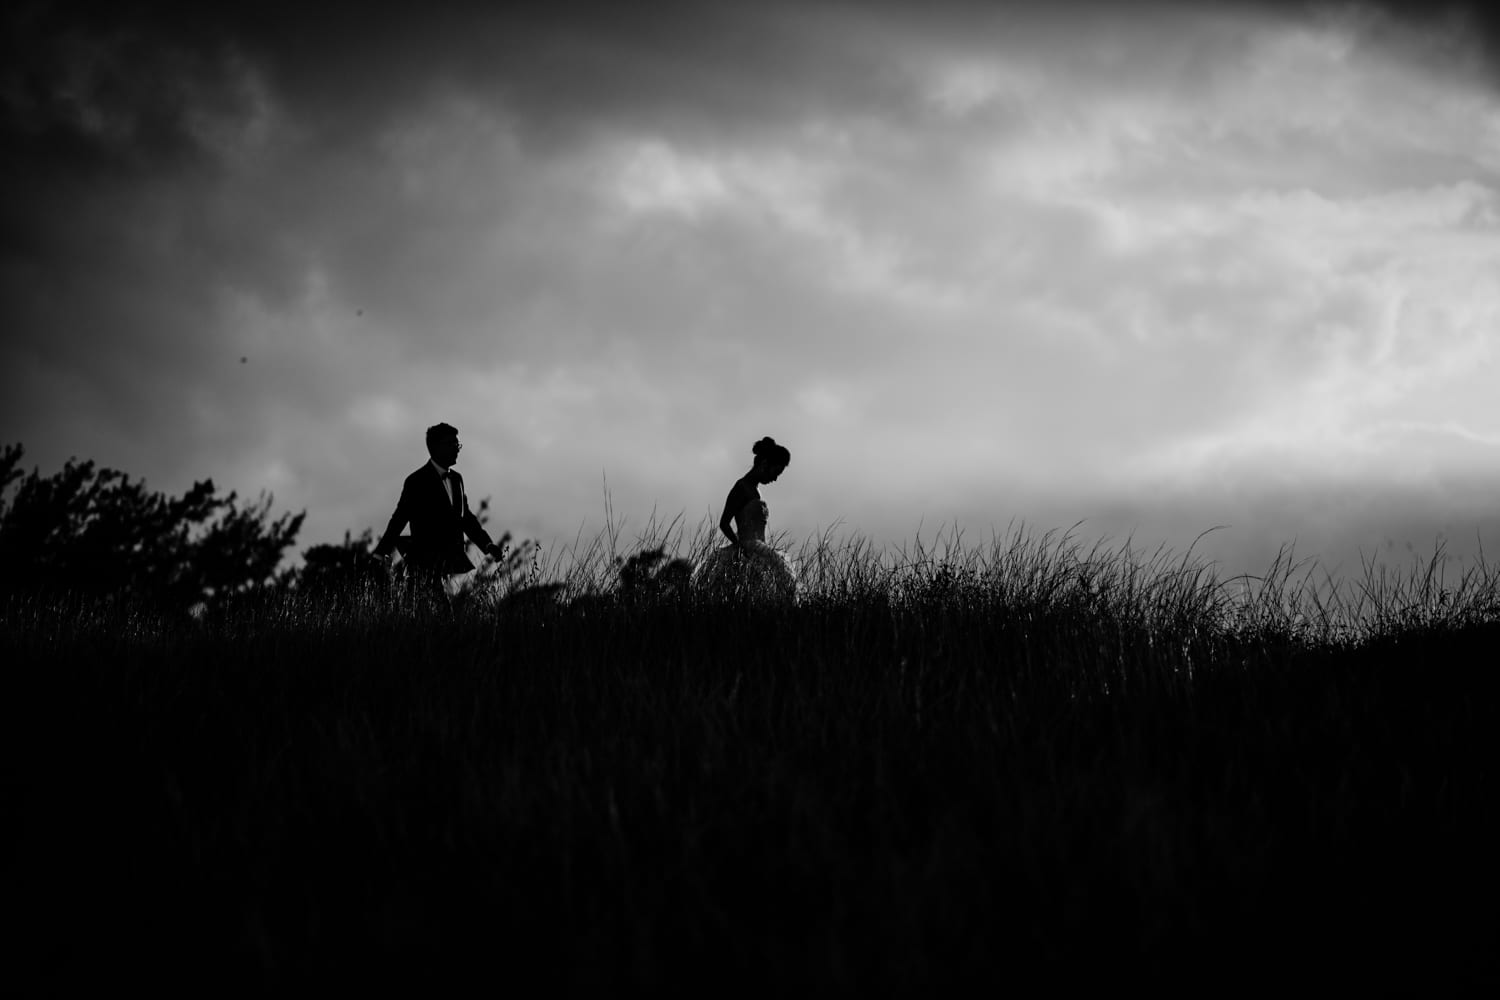 Two people walking on a hill under a cloudy sky.